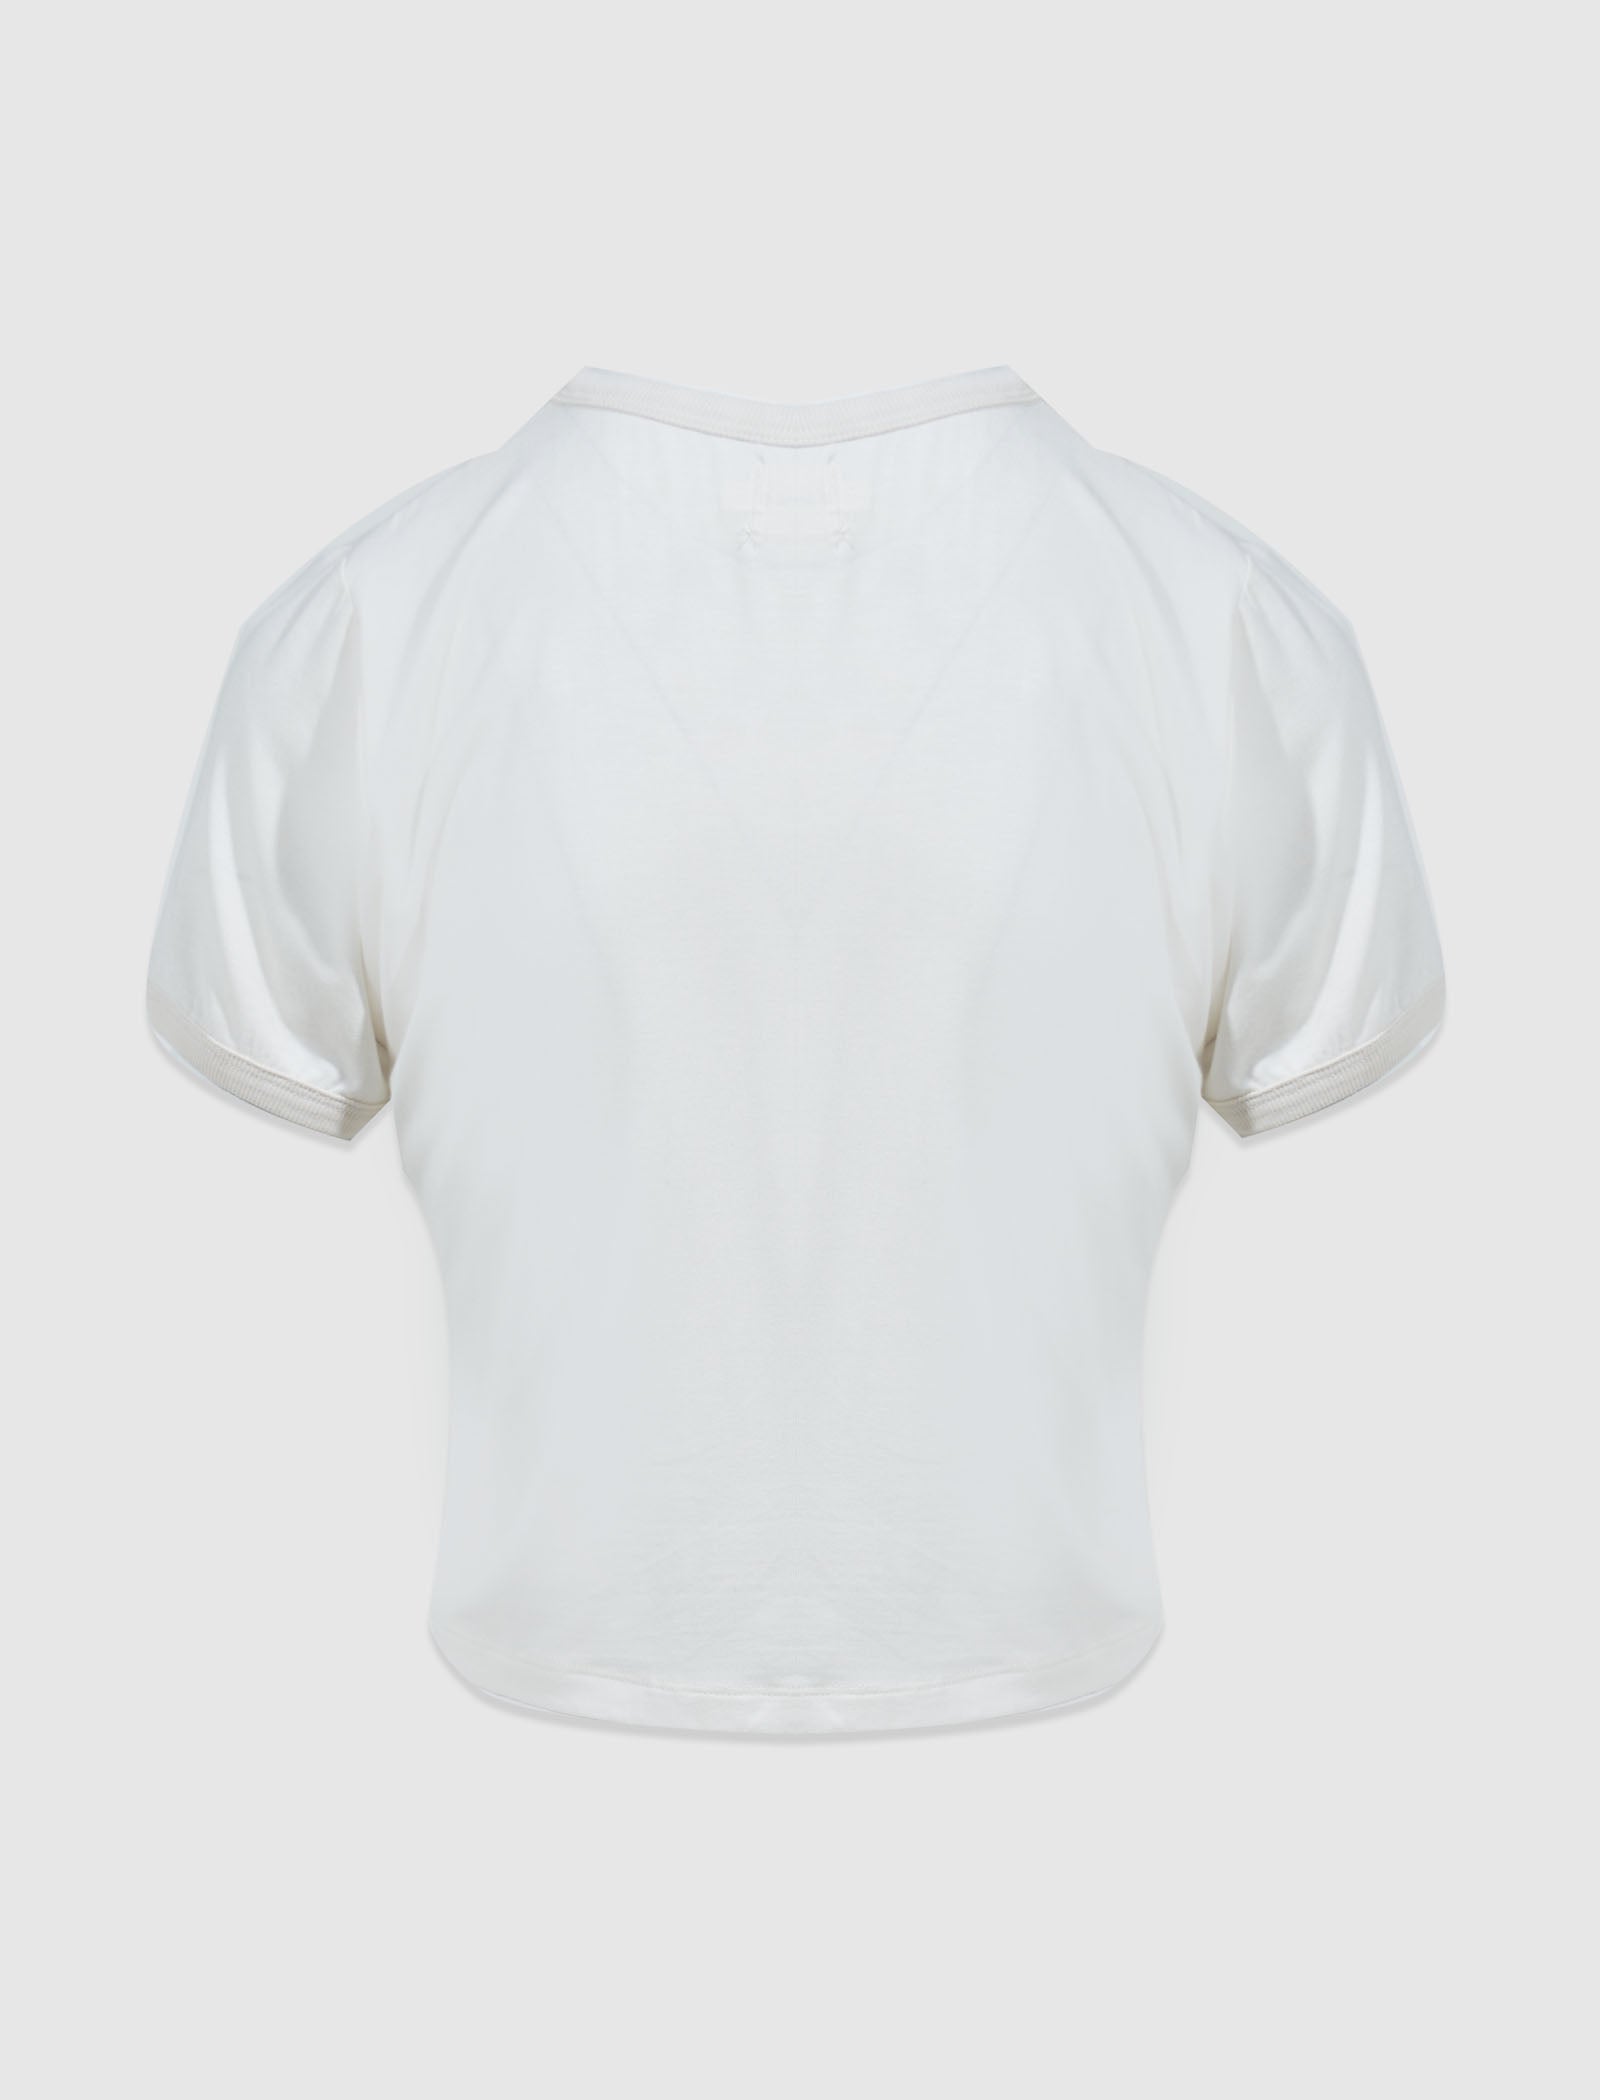 WOMEN'S A-SPRING PACK TEE